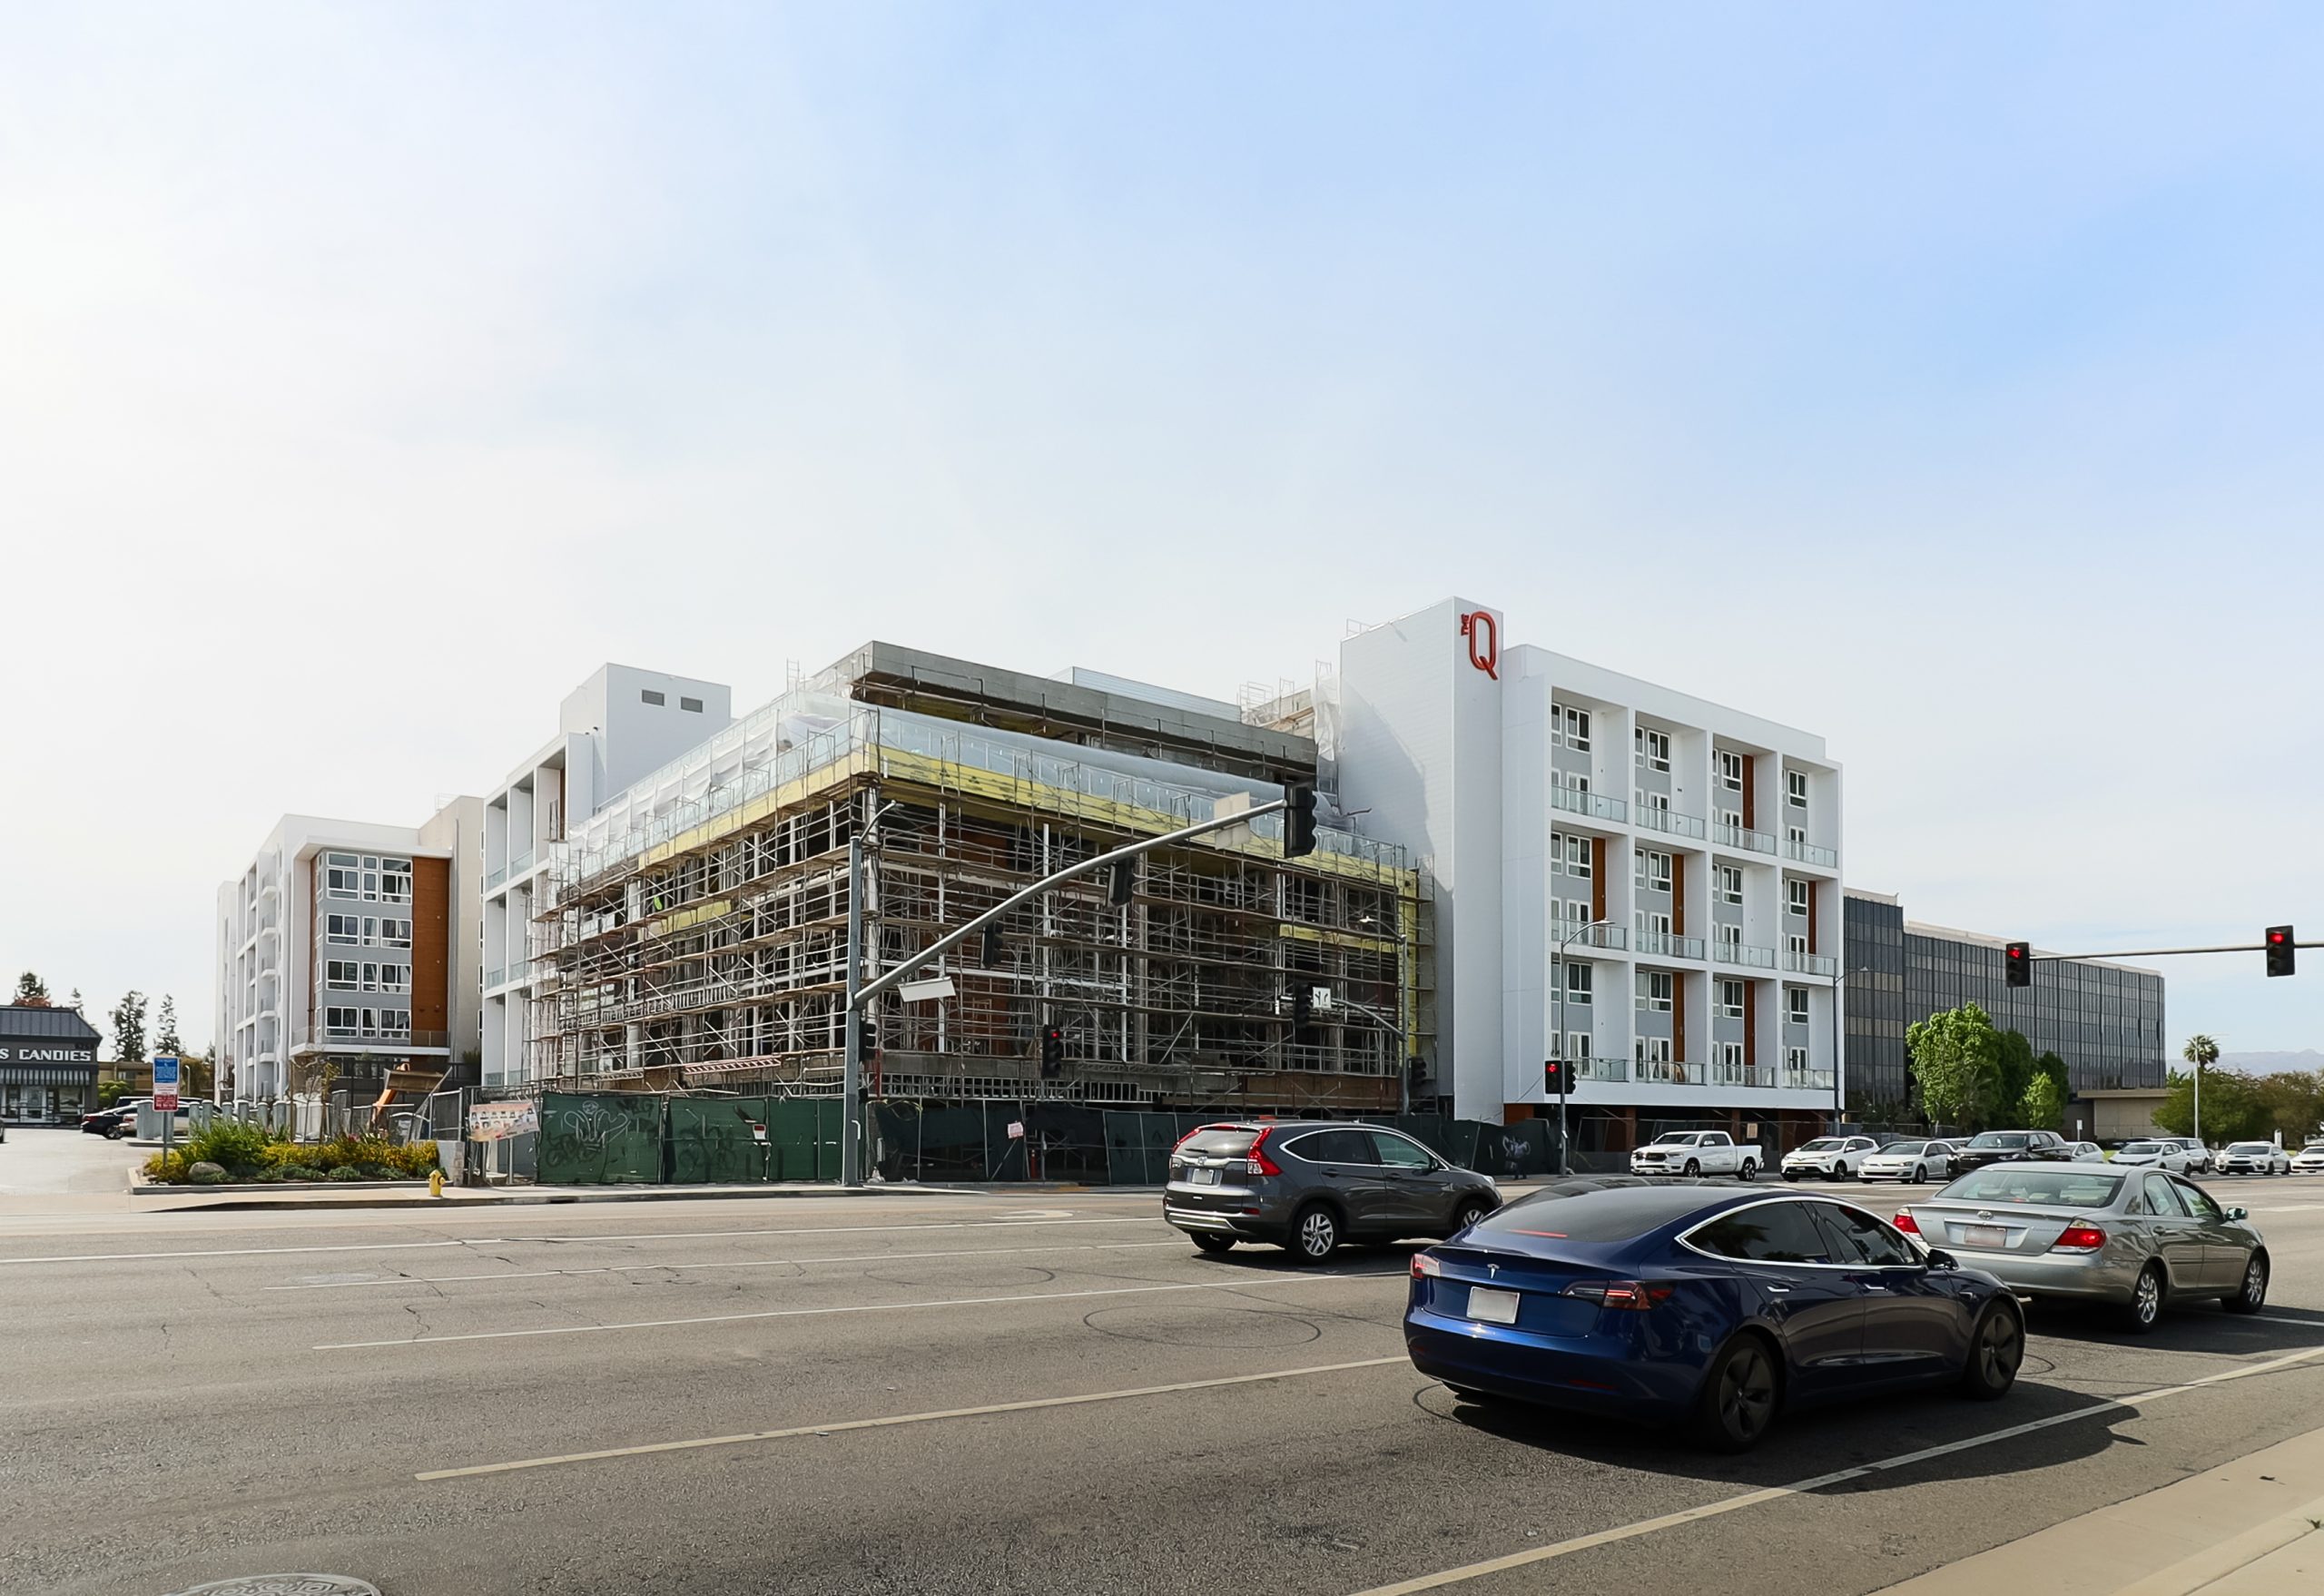 6263 Topanga Canyon Boulevard Tops out in Warner Center, Los